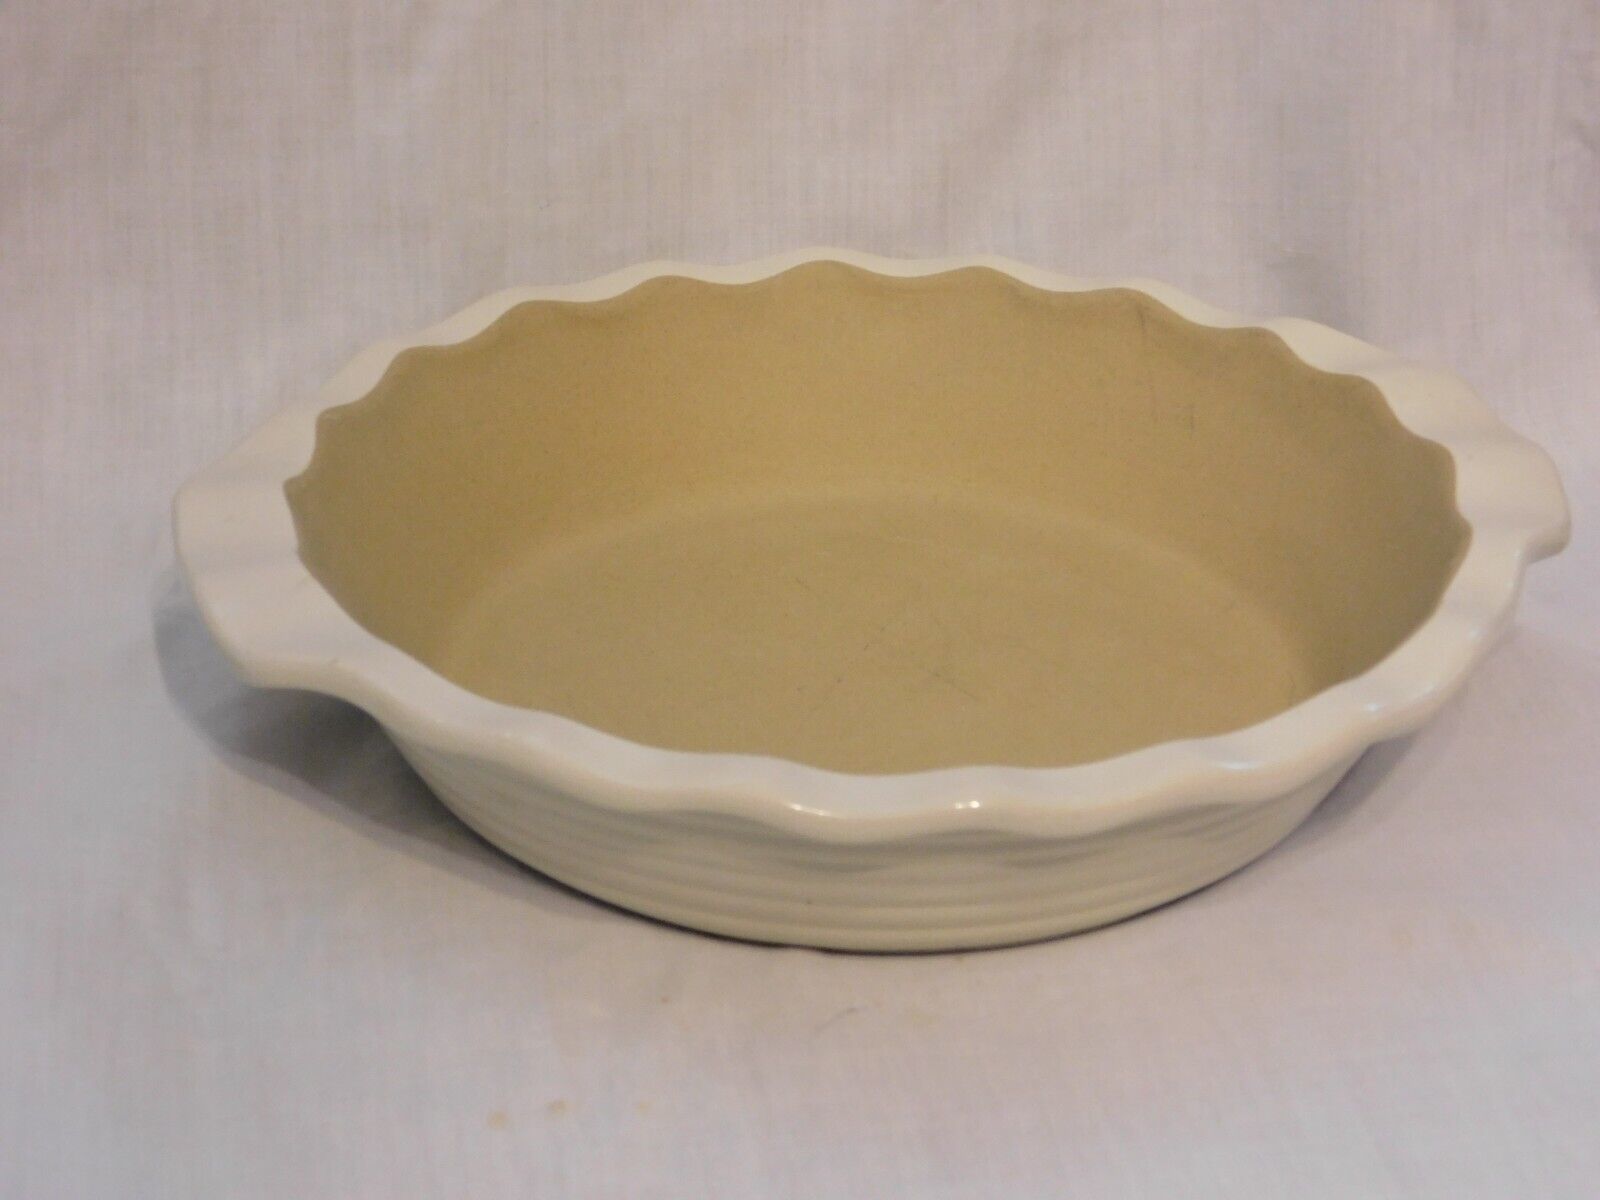 Primary image for 9" Pampered Chef Pie Plate